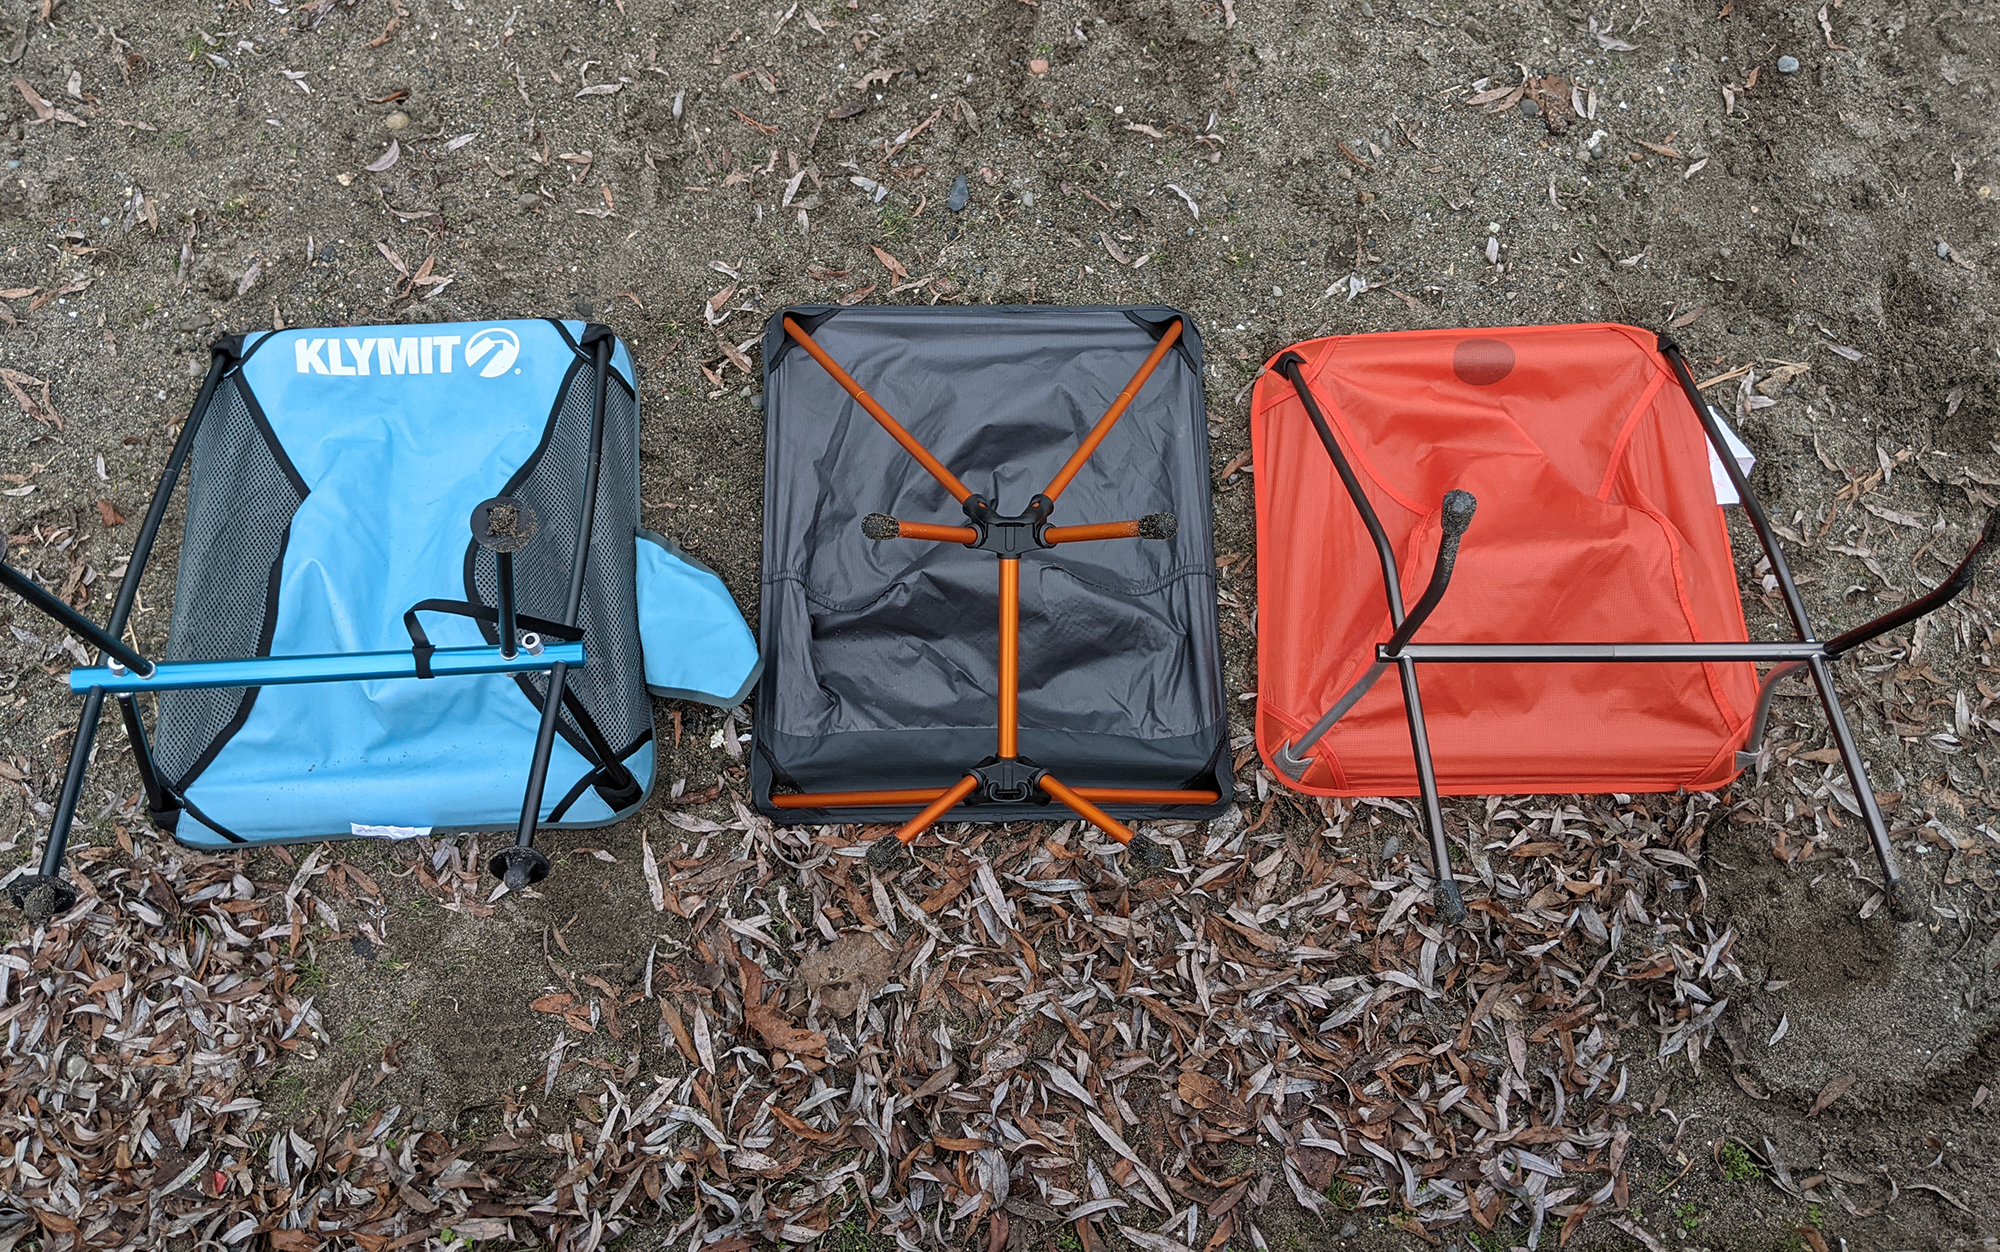 From left to right, a look at the underside of the Klymit Ridgeline Short, the REI Flexlite Air, and the Big Agnes Skyline UL. 